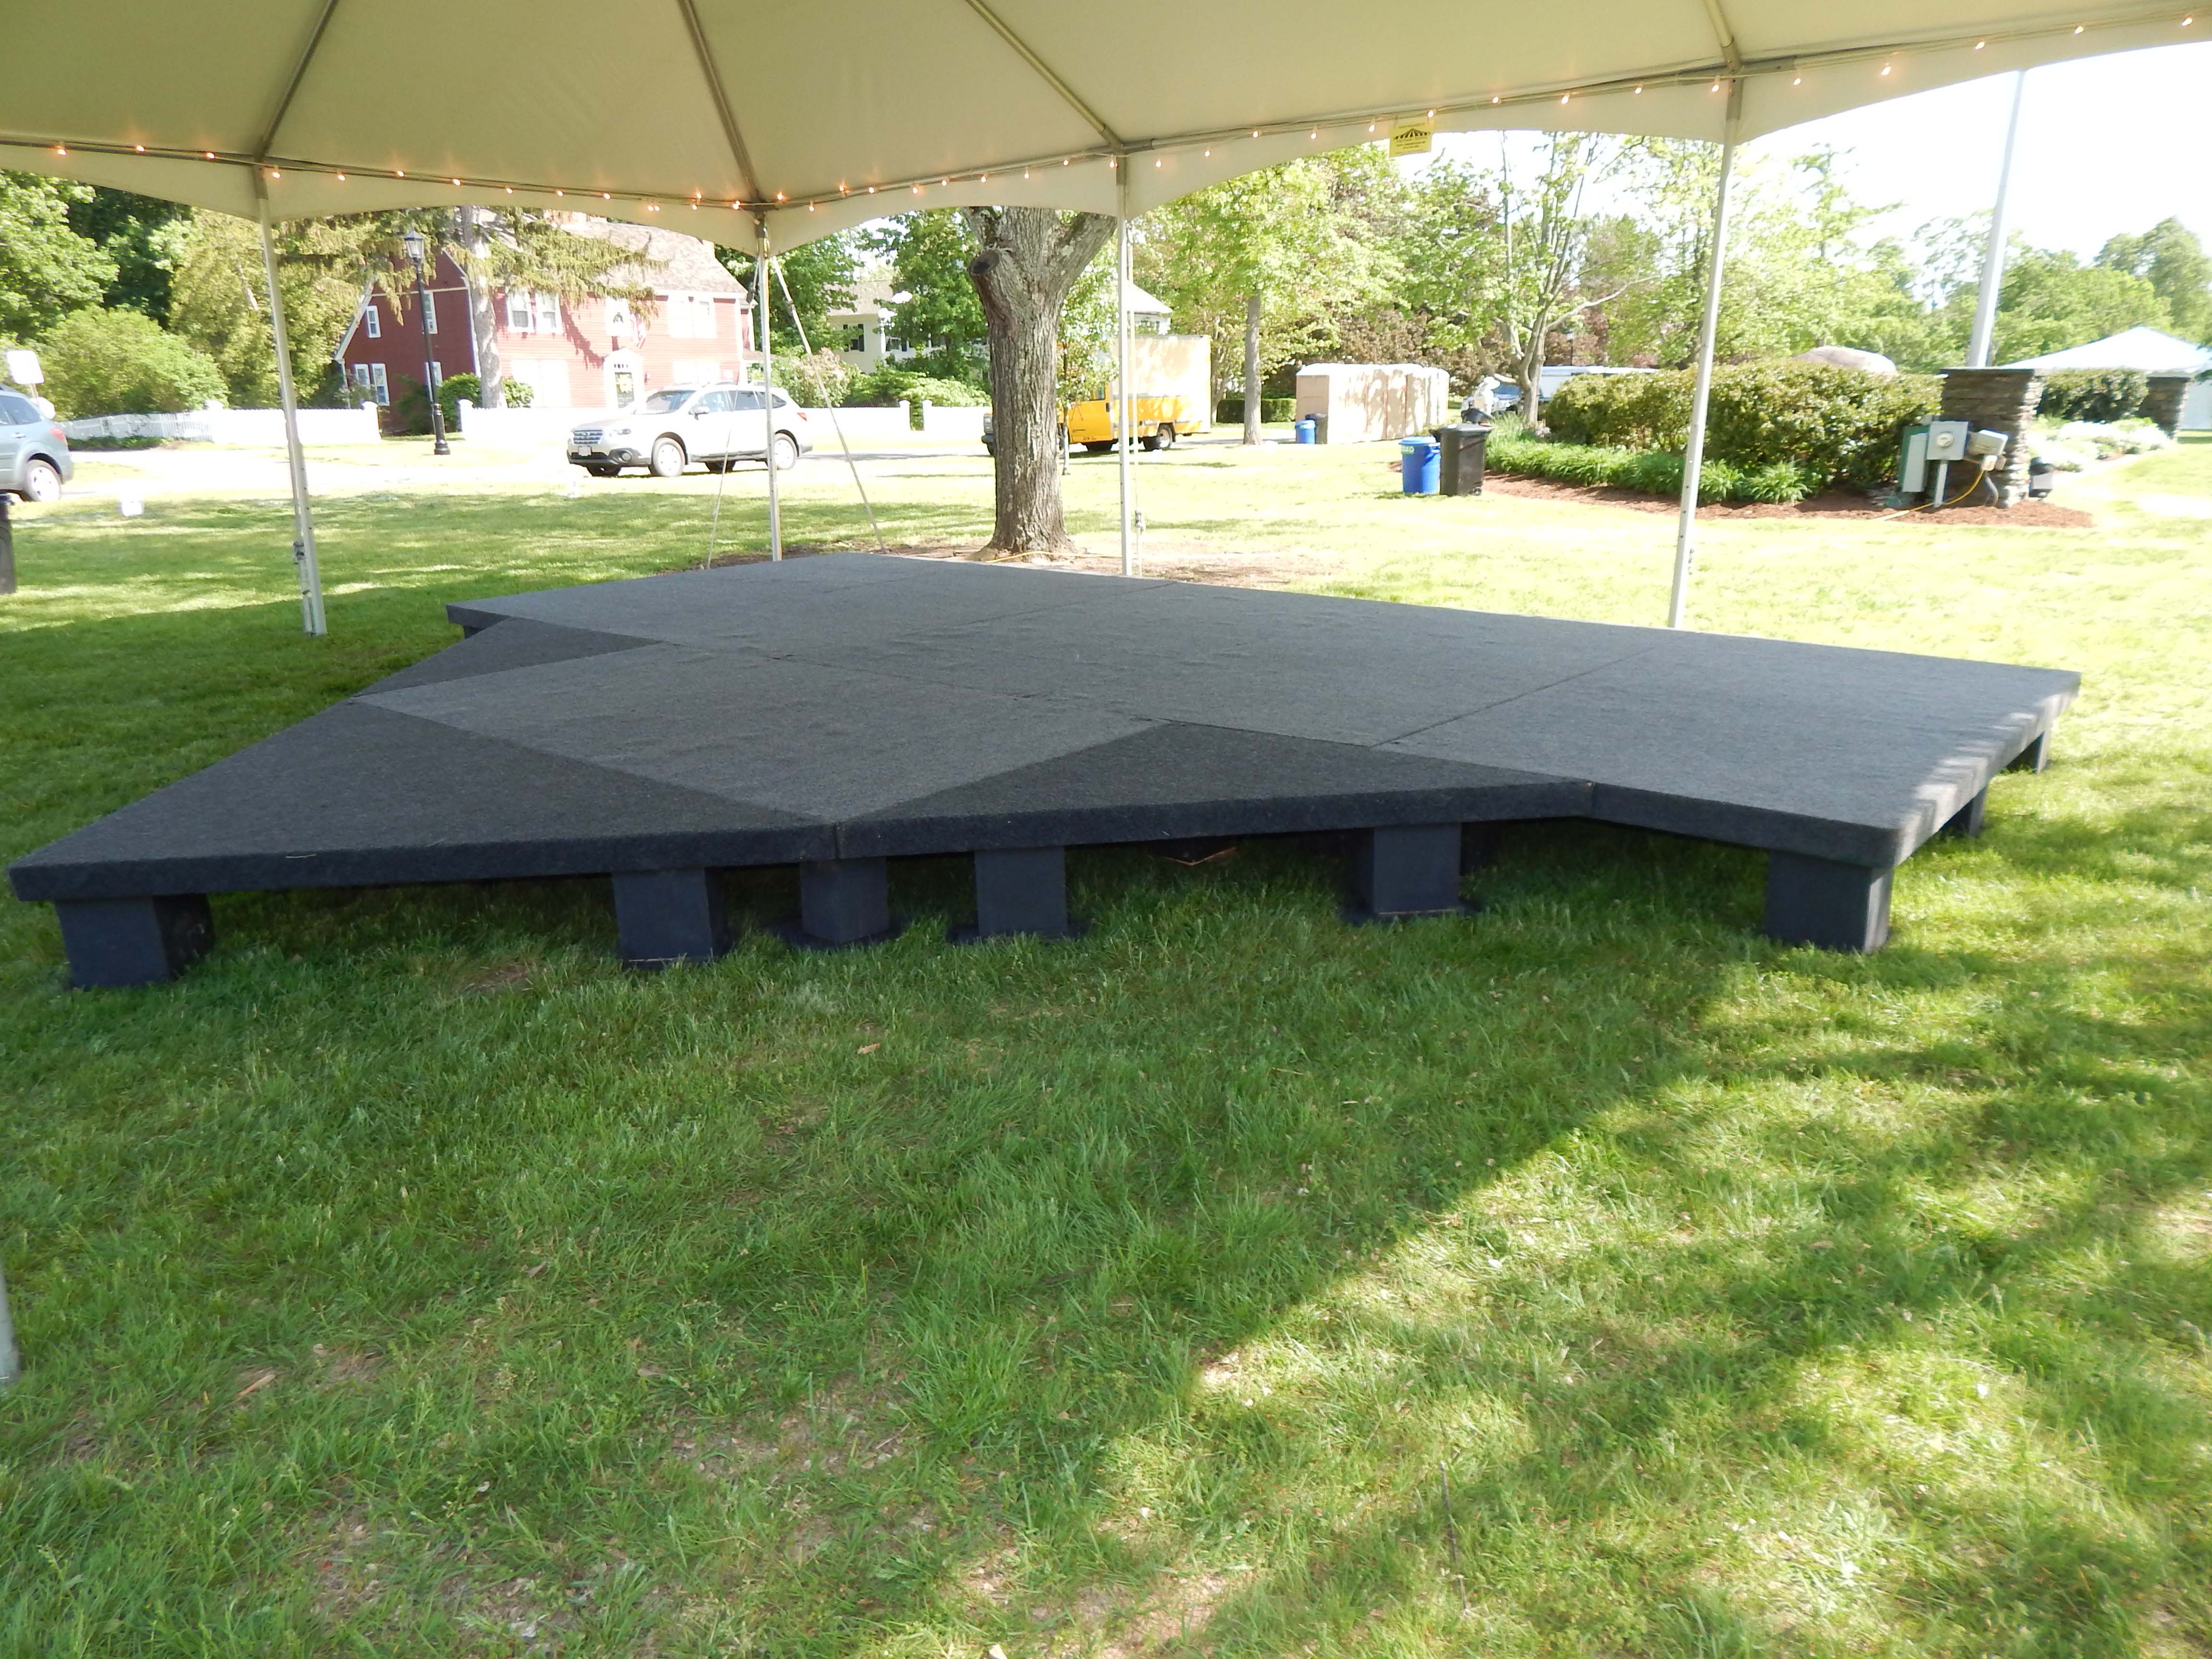 Longmeadow Days "Band Tent & Staging"